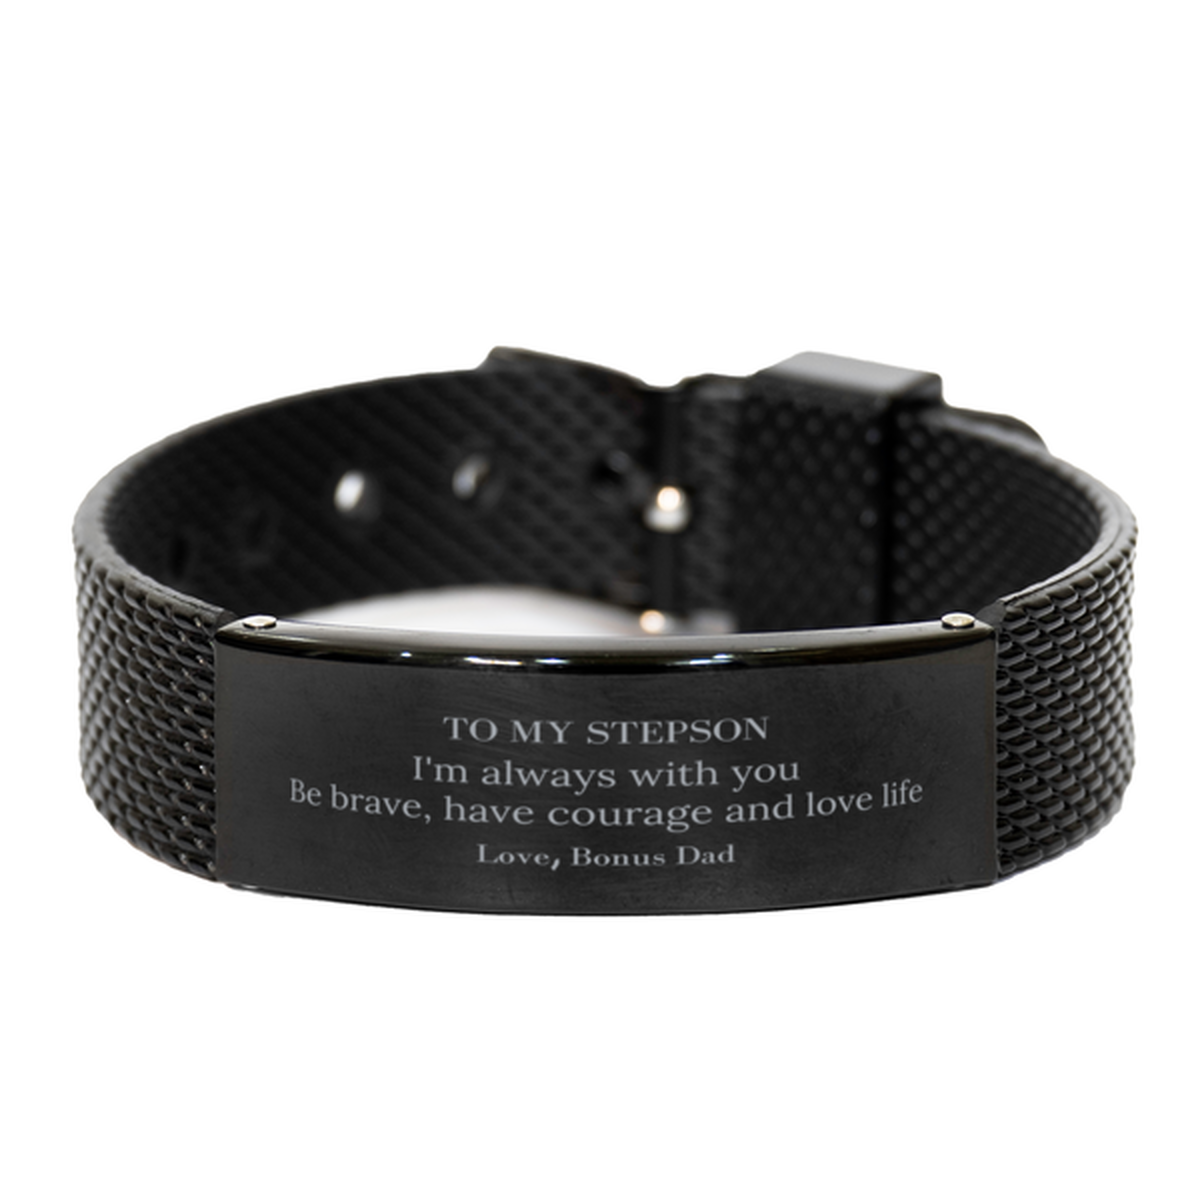 To My Stepson Gifts from Bonus Dad, Unique Black Shark Mesh Bracelet Inspirational Christmas Birthday Graduation Gifts for Stepson I'm always with you. Be brave, have courage and love life. Love, Bonus Dad